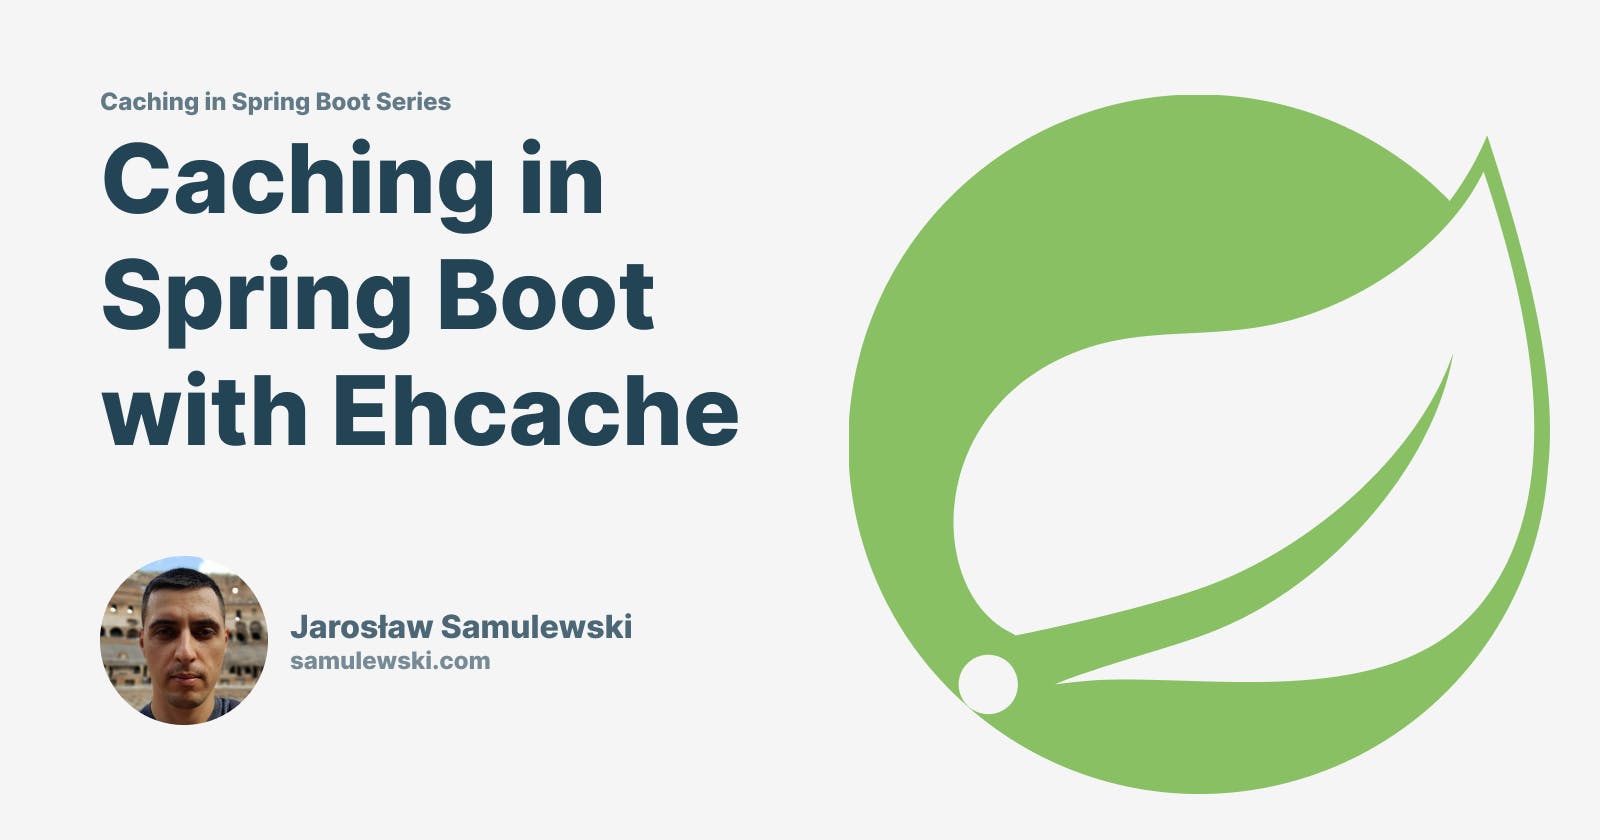 Caching in Spring Boot with Ehcache